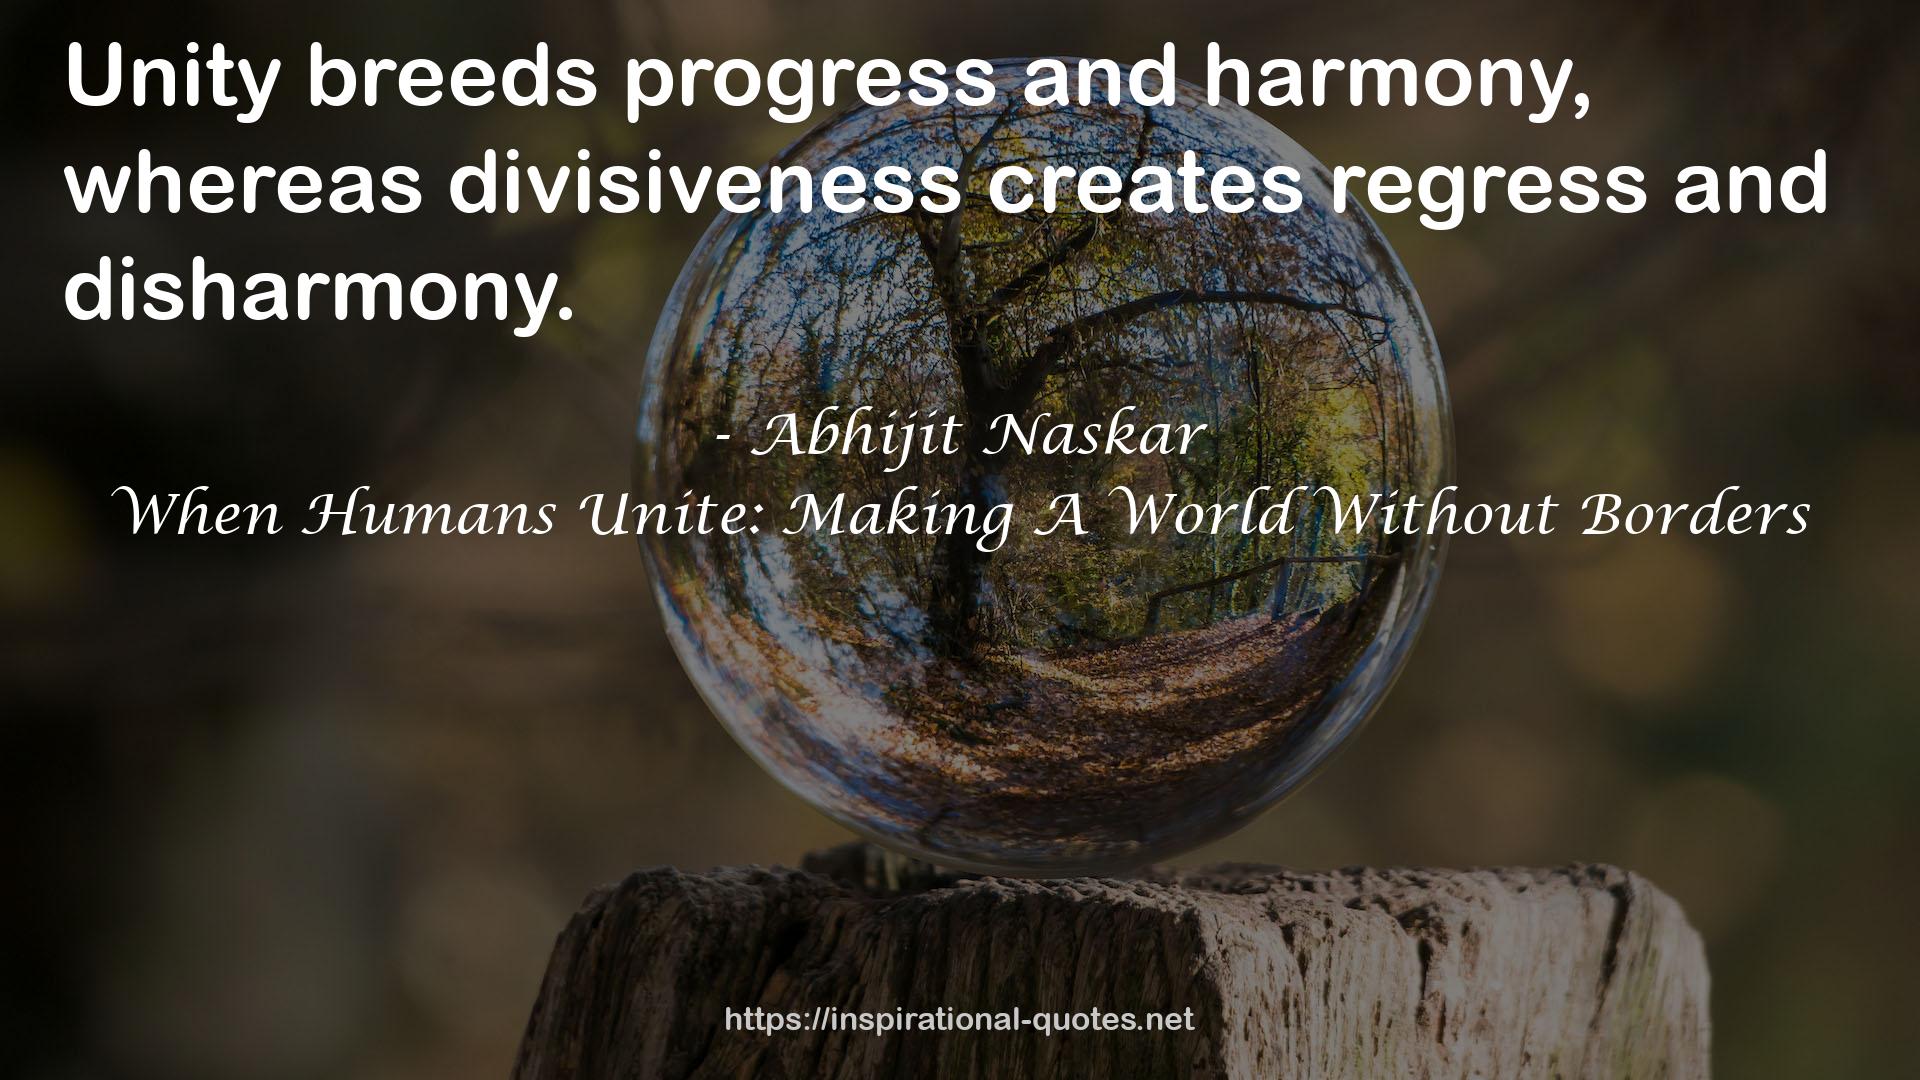 When Humans Unite: Making A World Without Borders QUOTES